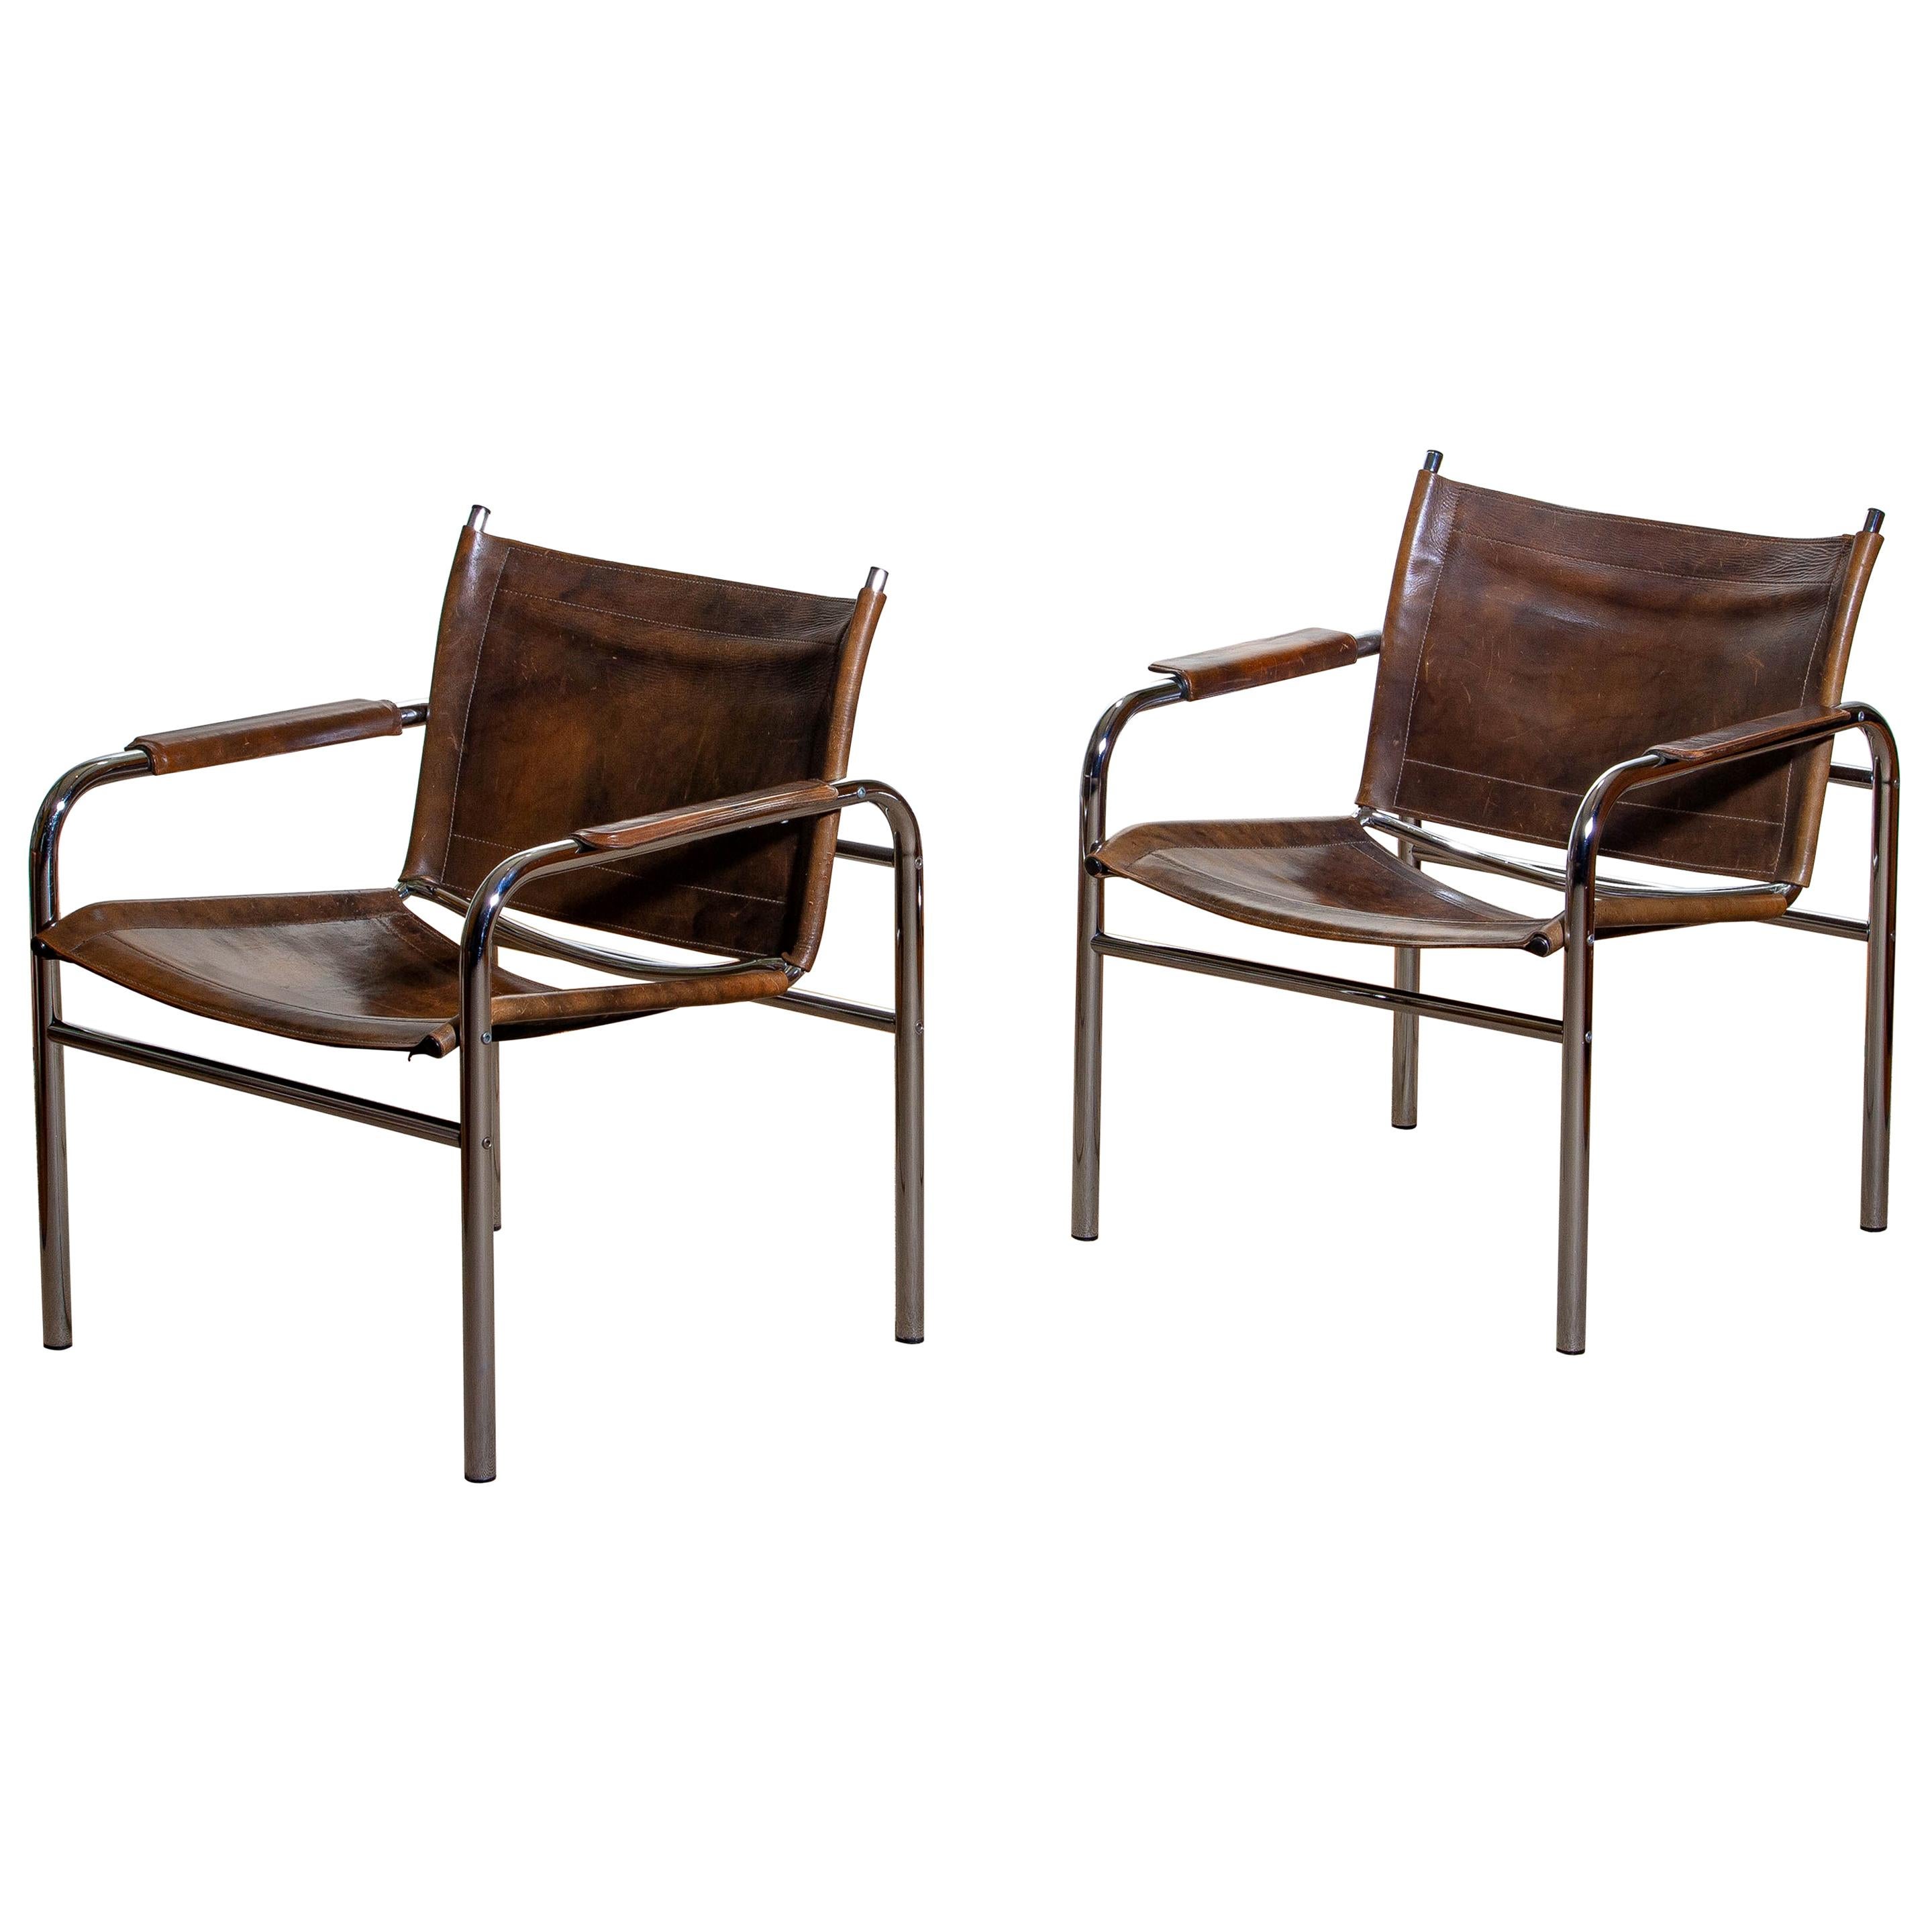 1980s, Pair of Leather and Tubular Steel Armchairs by Tord Bjorklund, Sweden